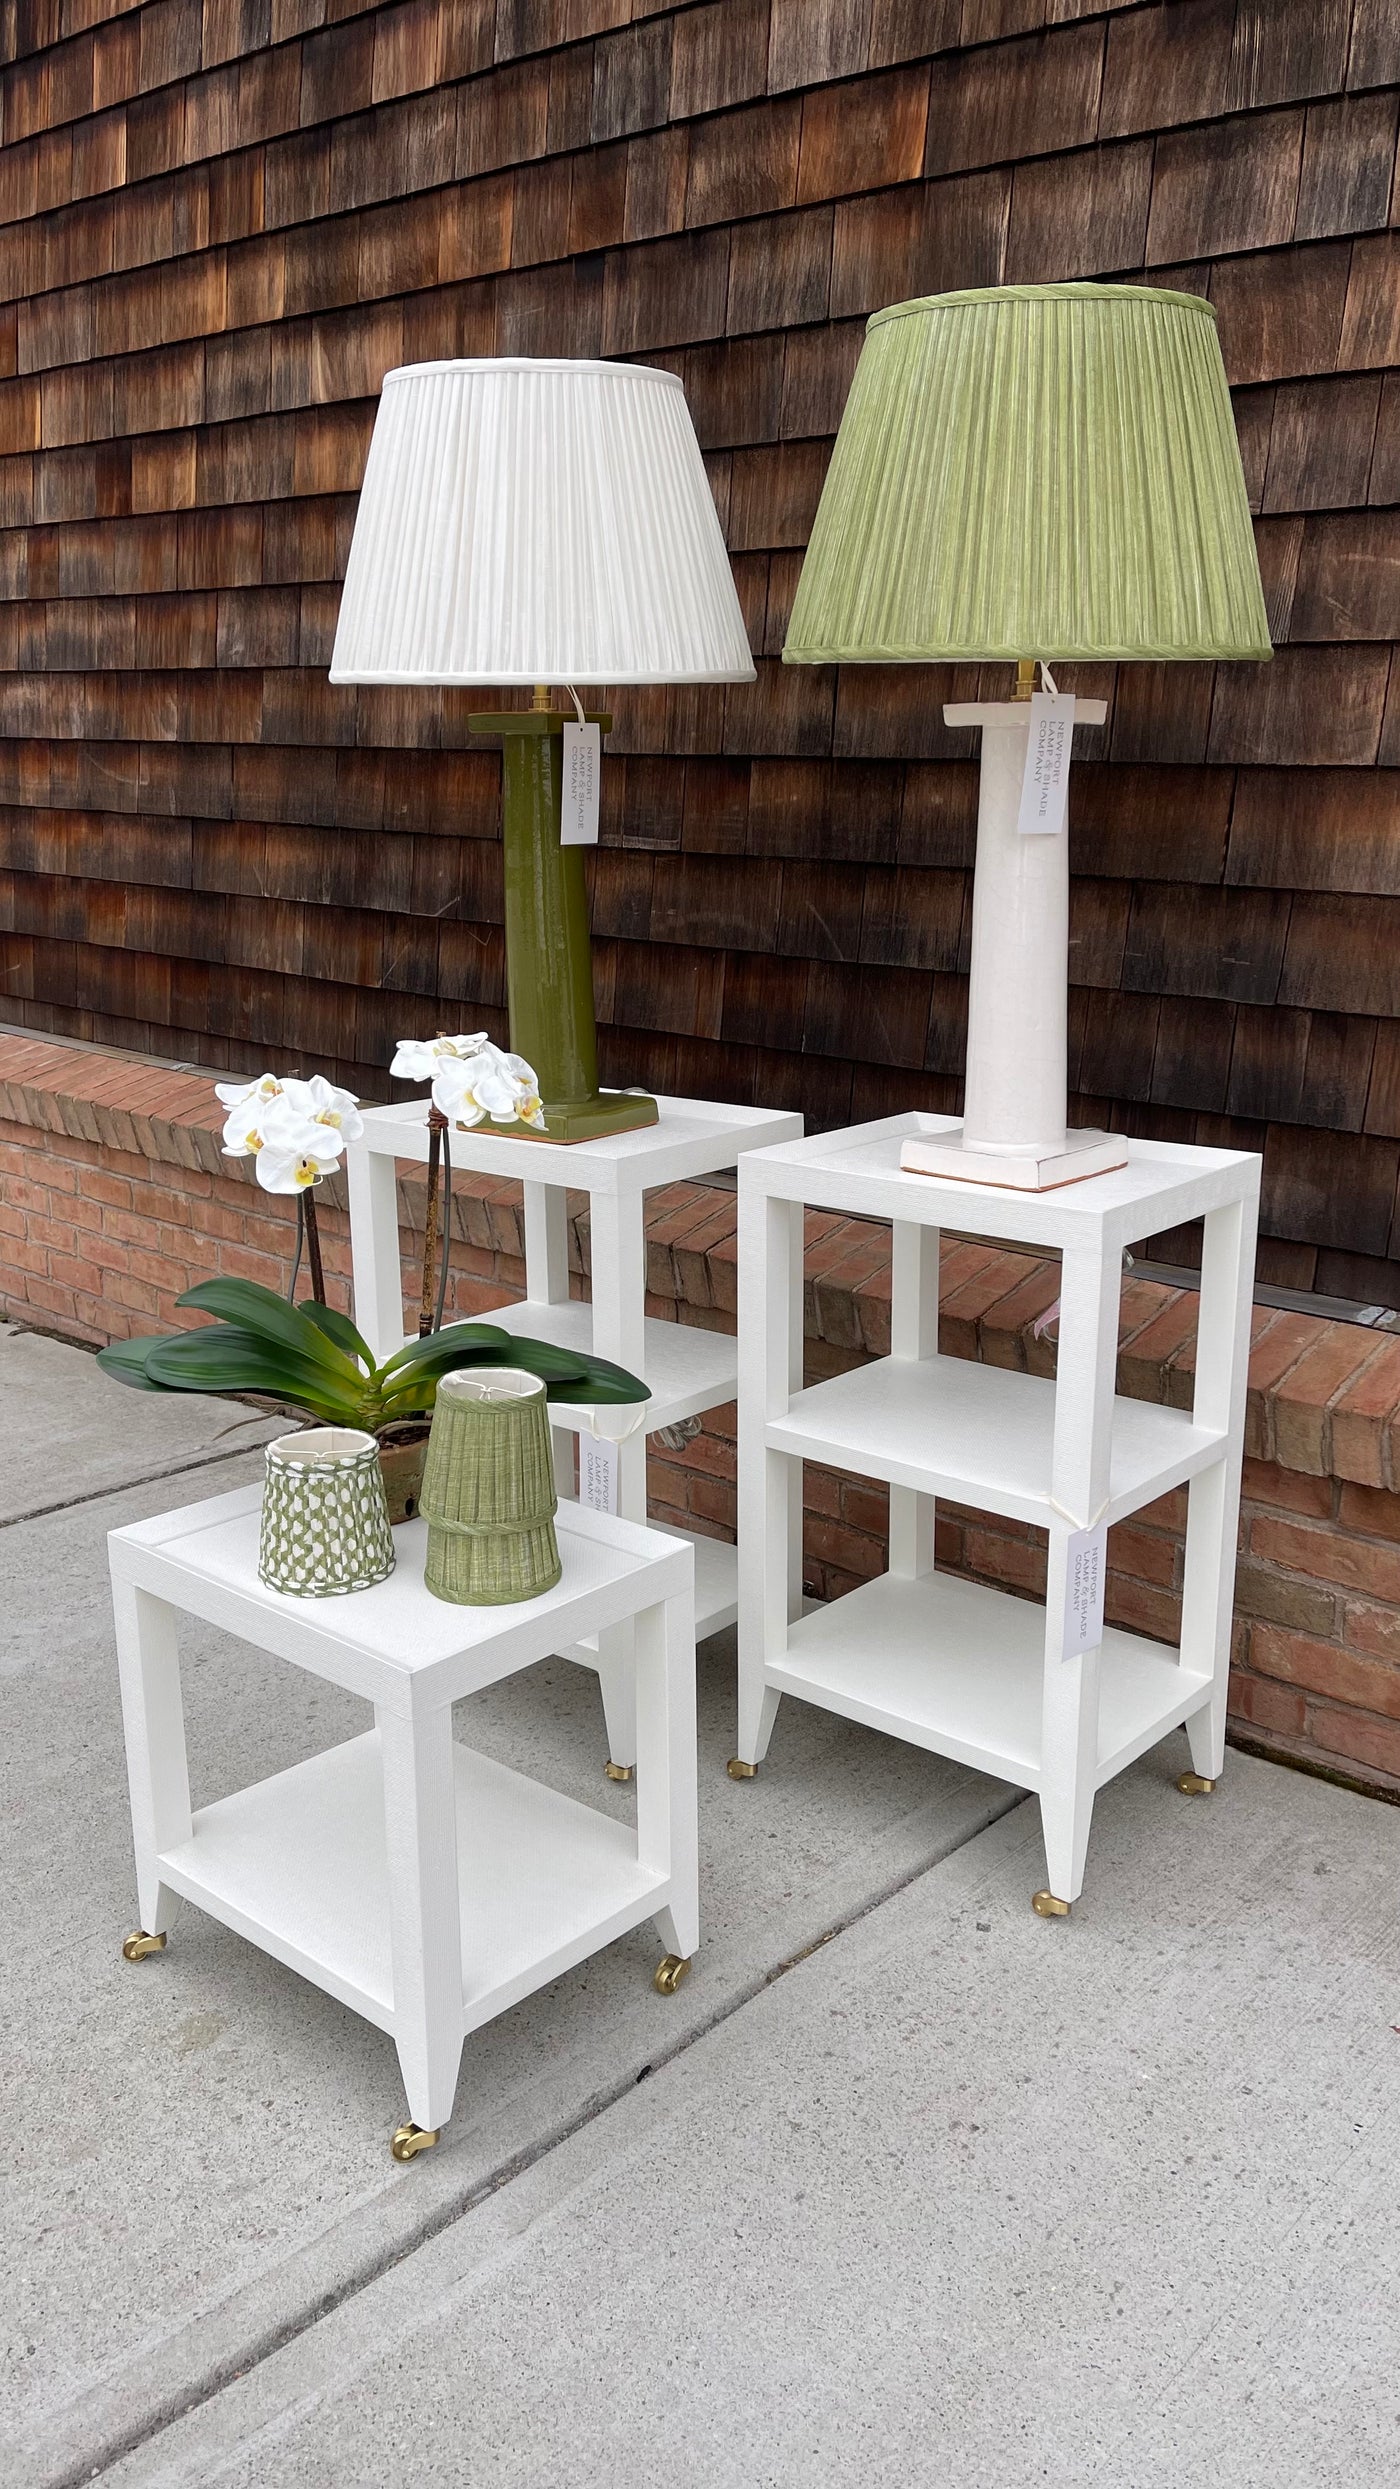 Telephone Table on Casters | Newport Lamp And Shade | Located in Newport, RI